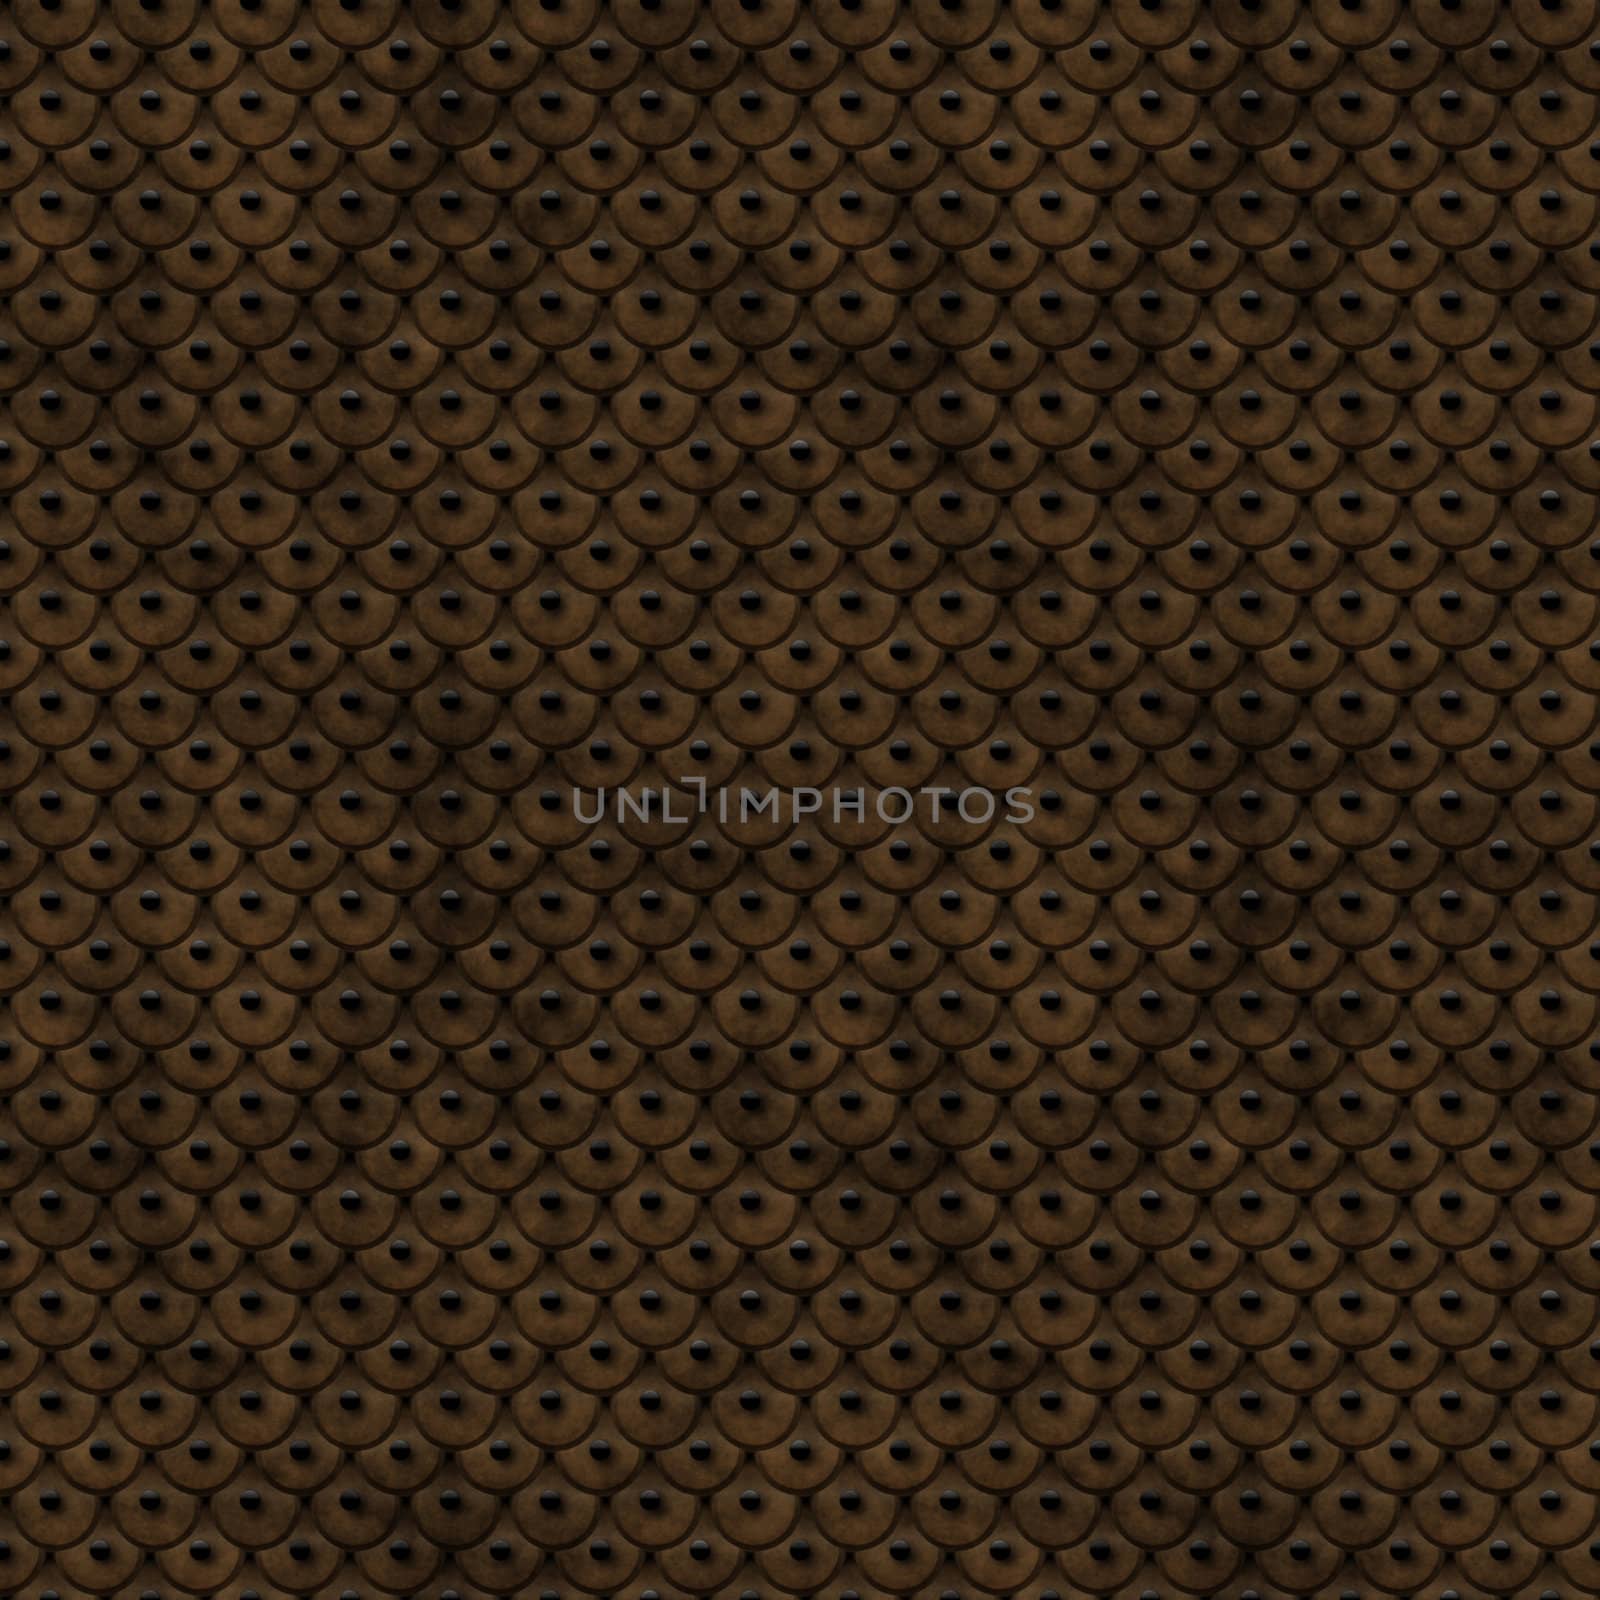 Ancient Leather Scales Seamless Pattern Illustration